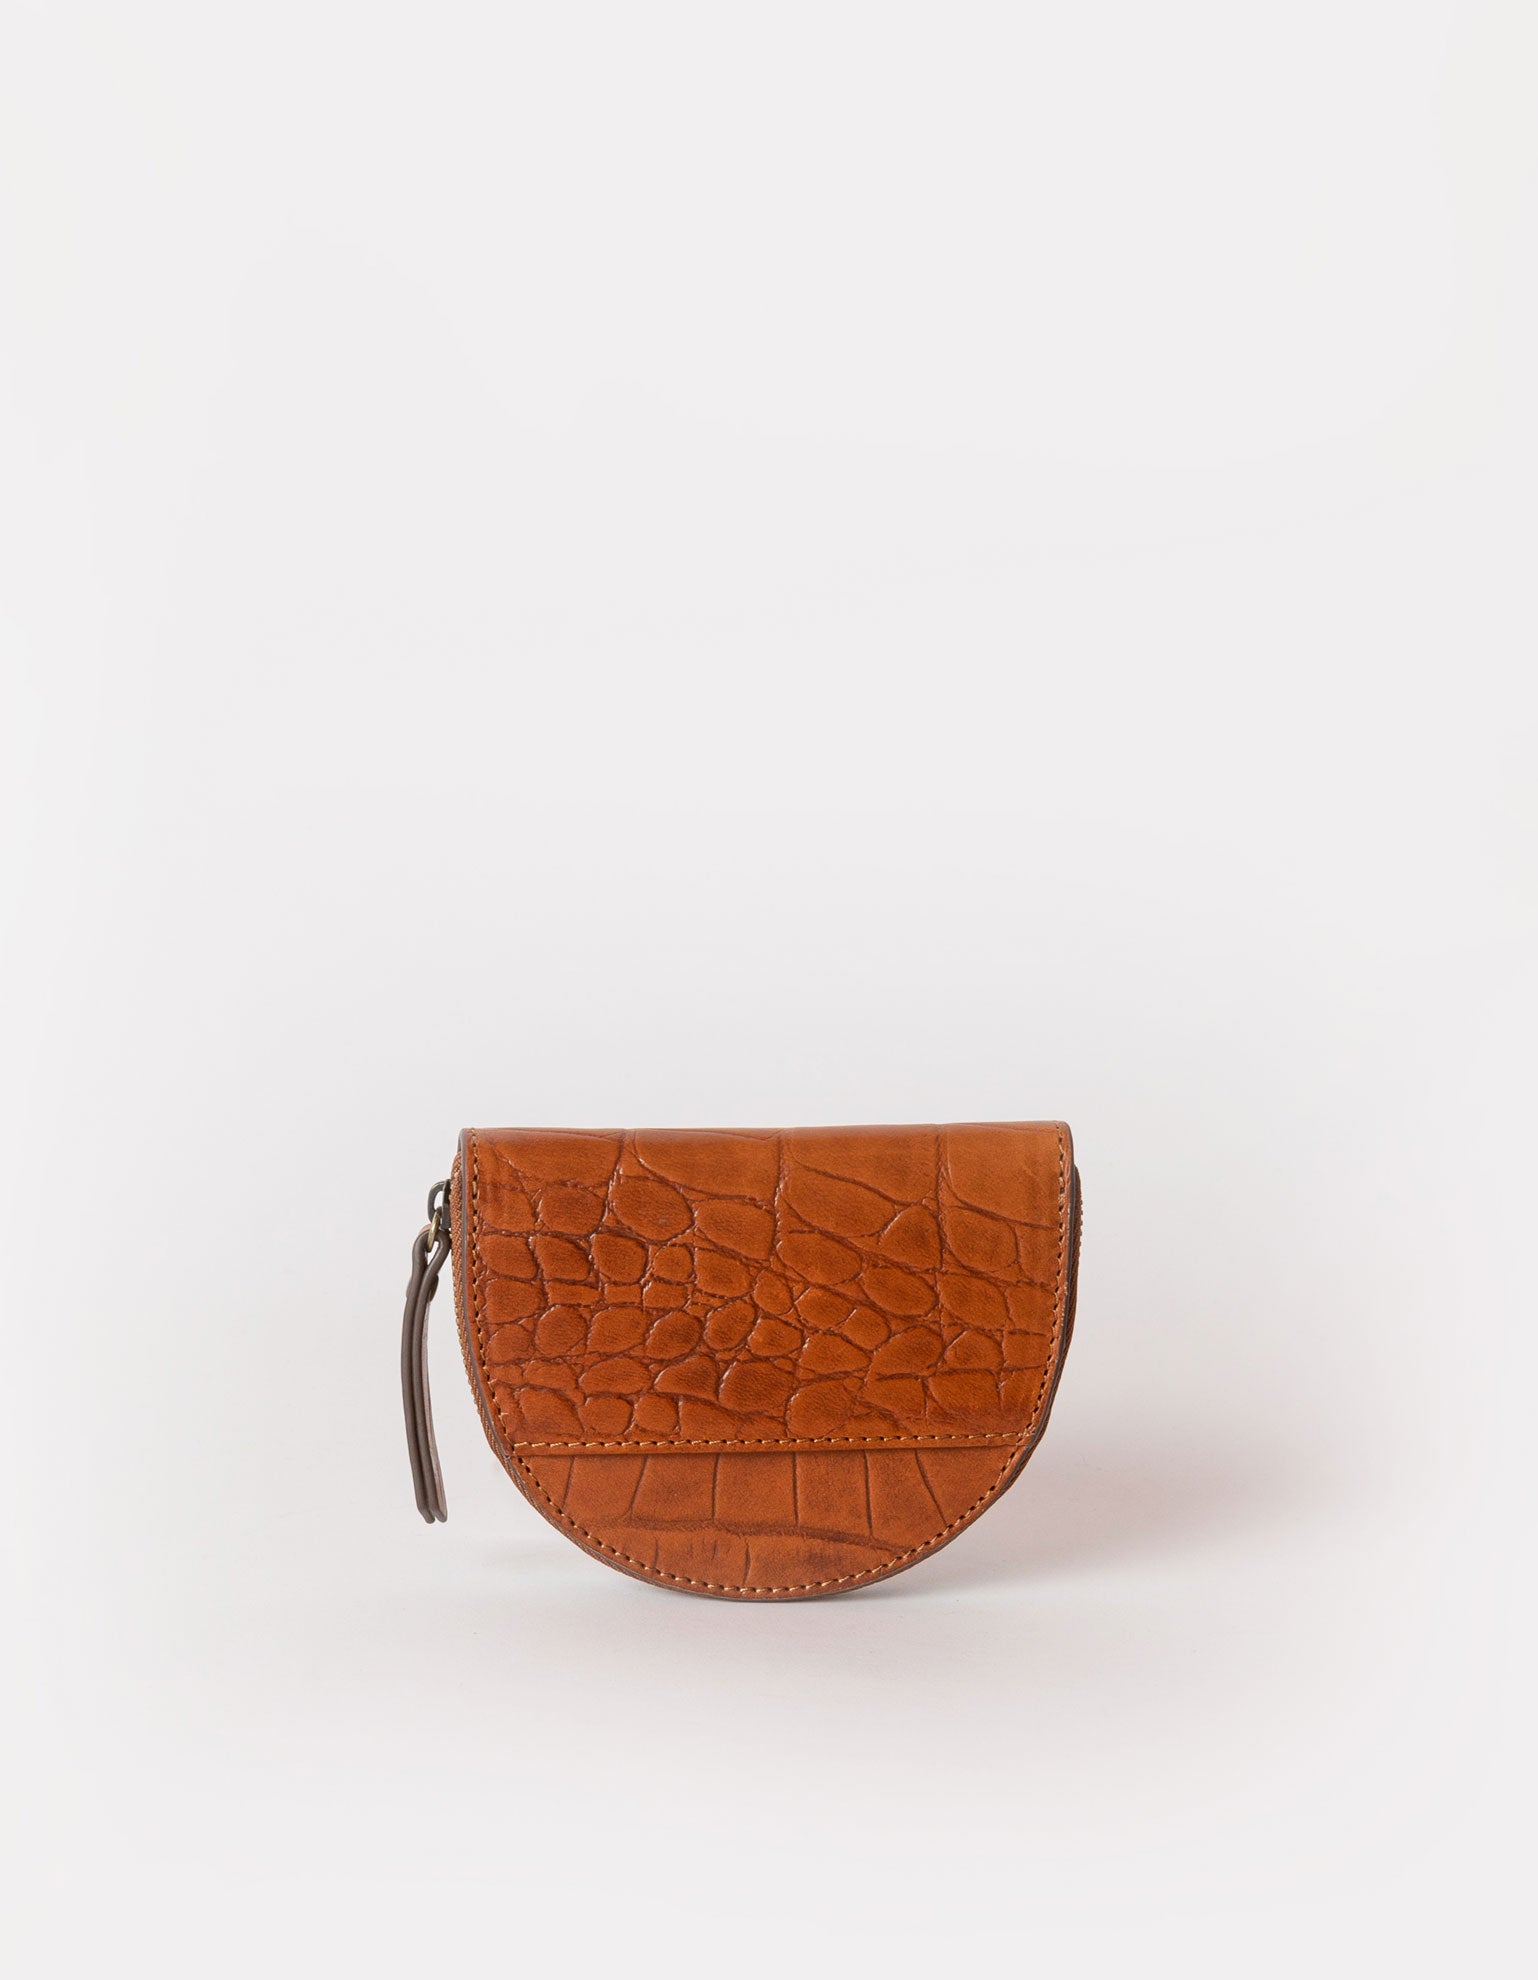 Laura Purse Cognac Classic Croco Leather. Round moon shape coin purse unisex wallet. Back product image.